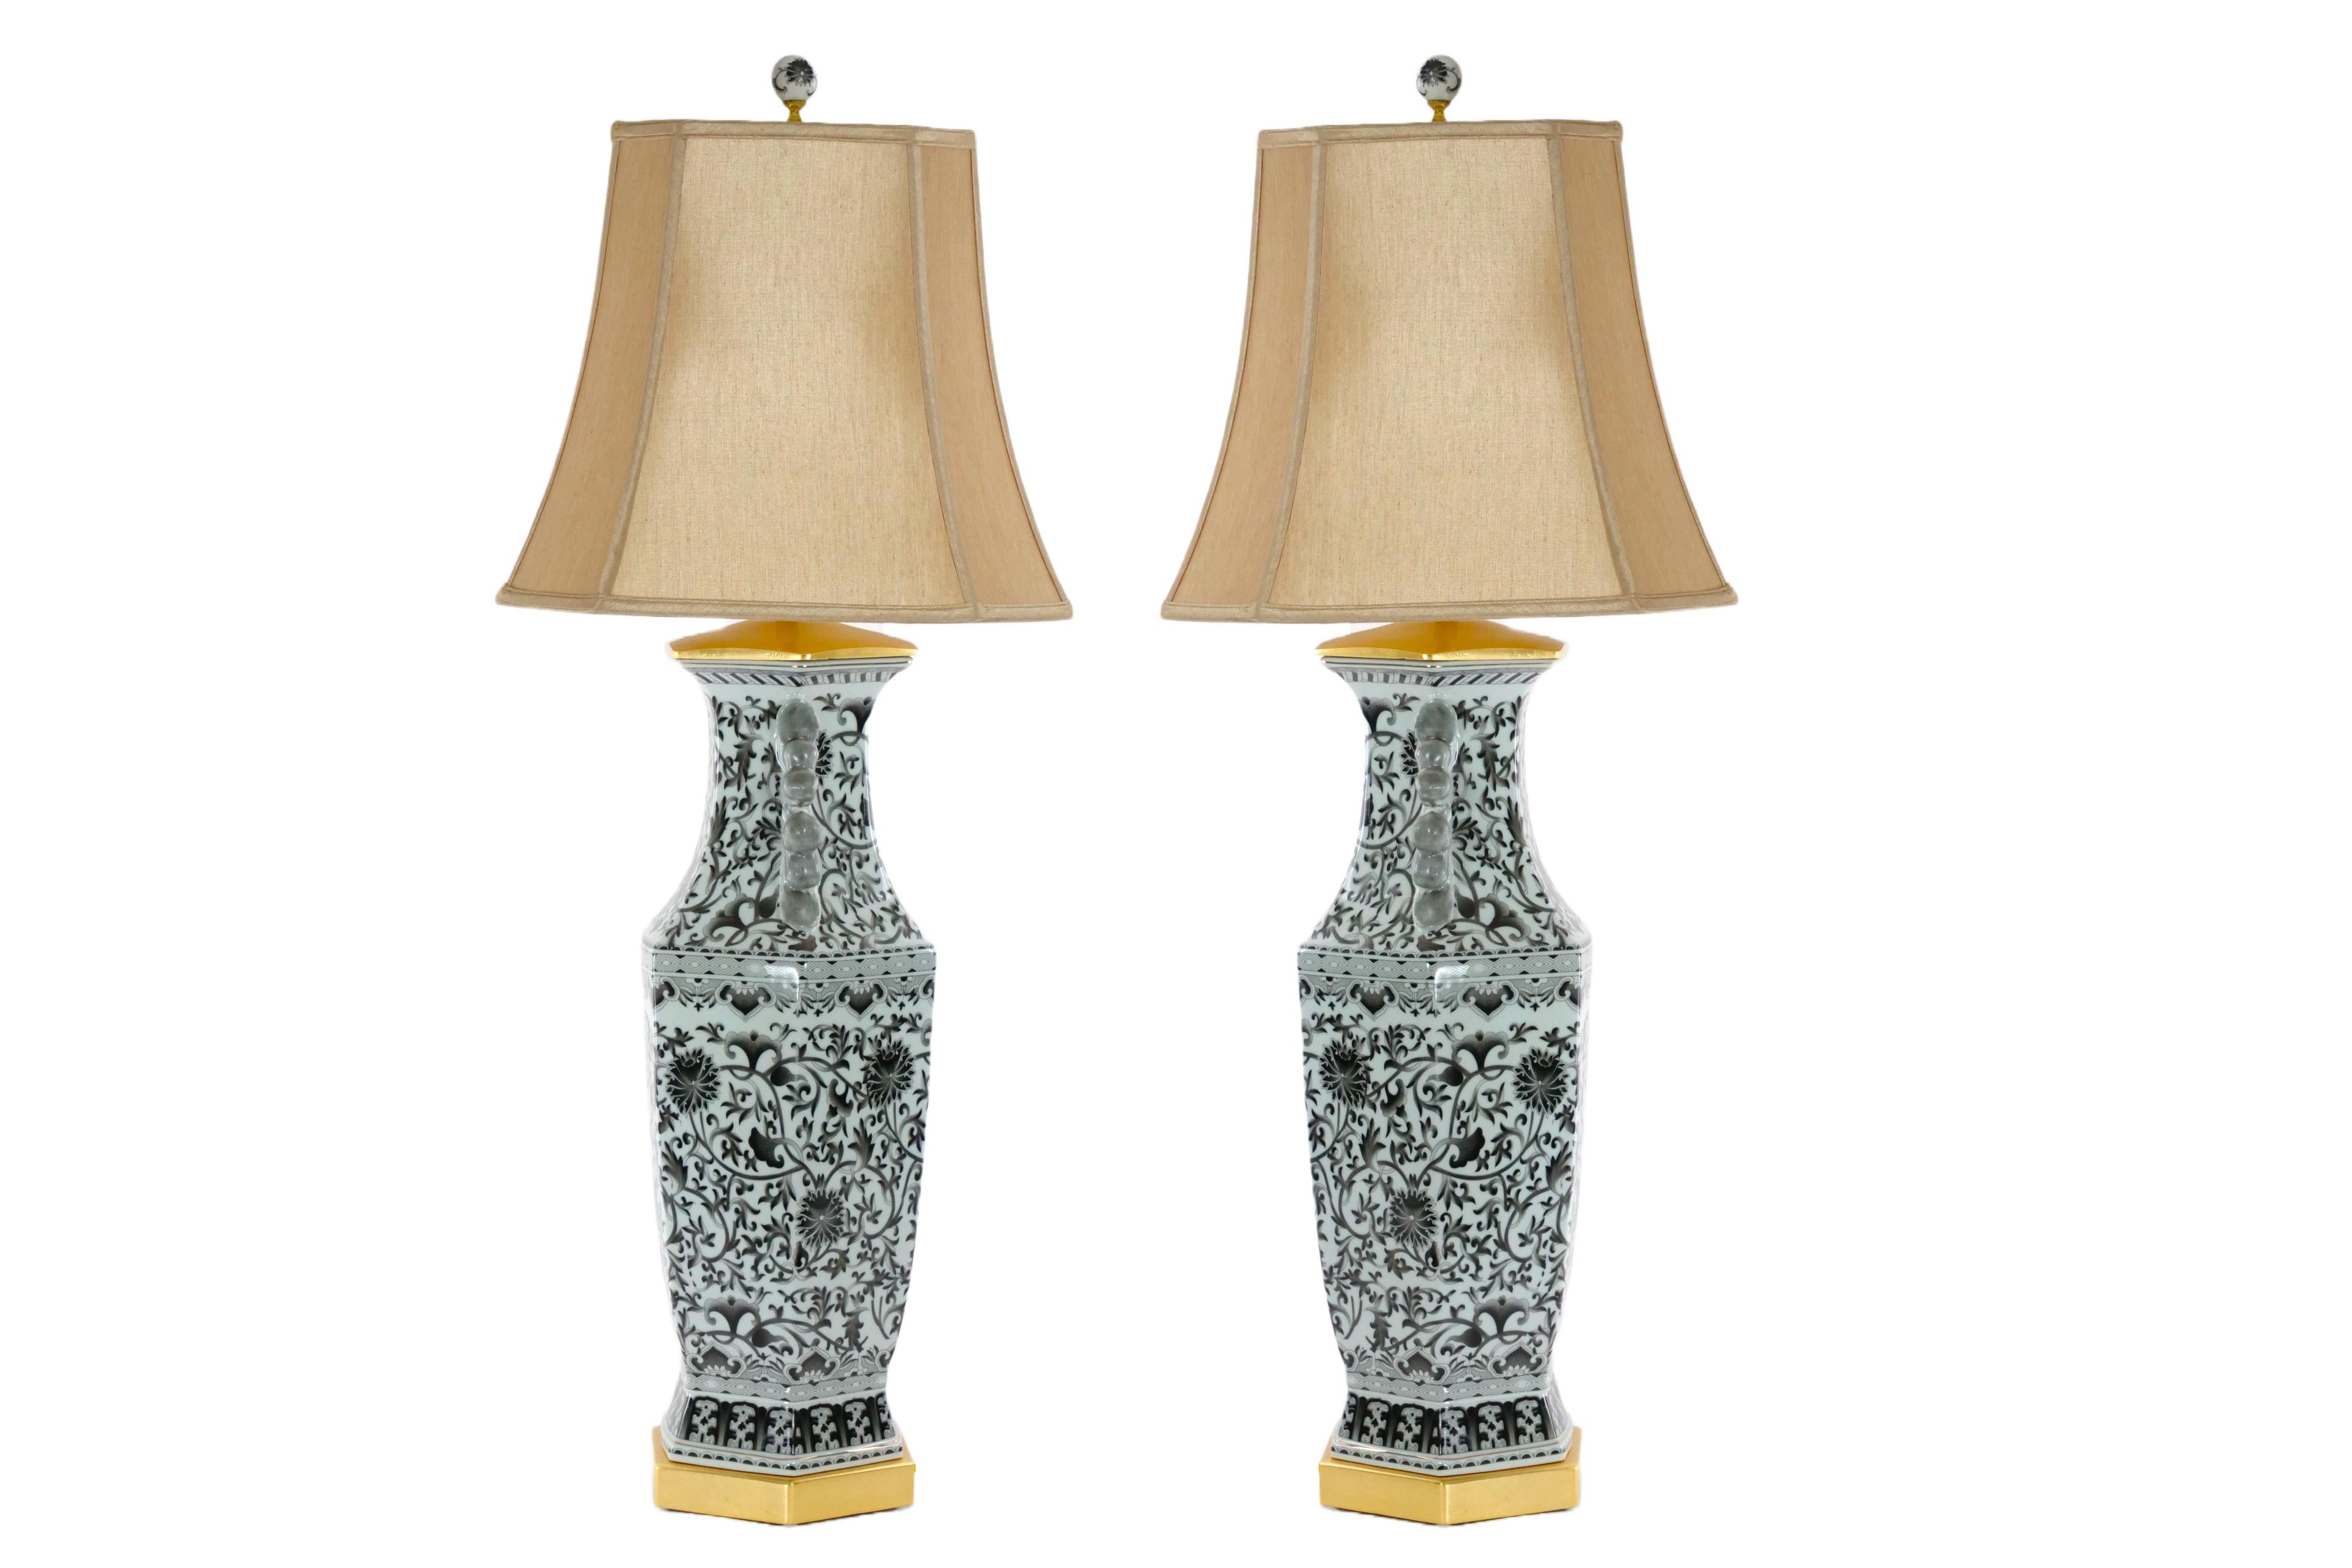 Beautifully hand painted and decorated large glazed tapestry porcelain pair table lamps. Each lamp features an hand decorated and painted black tapestry with white background design, with two side handles in a geometric shape form resting on a gilt